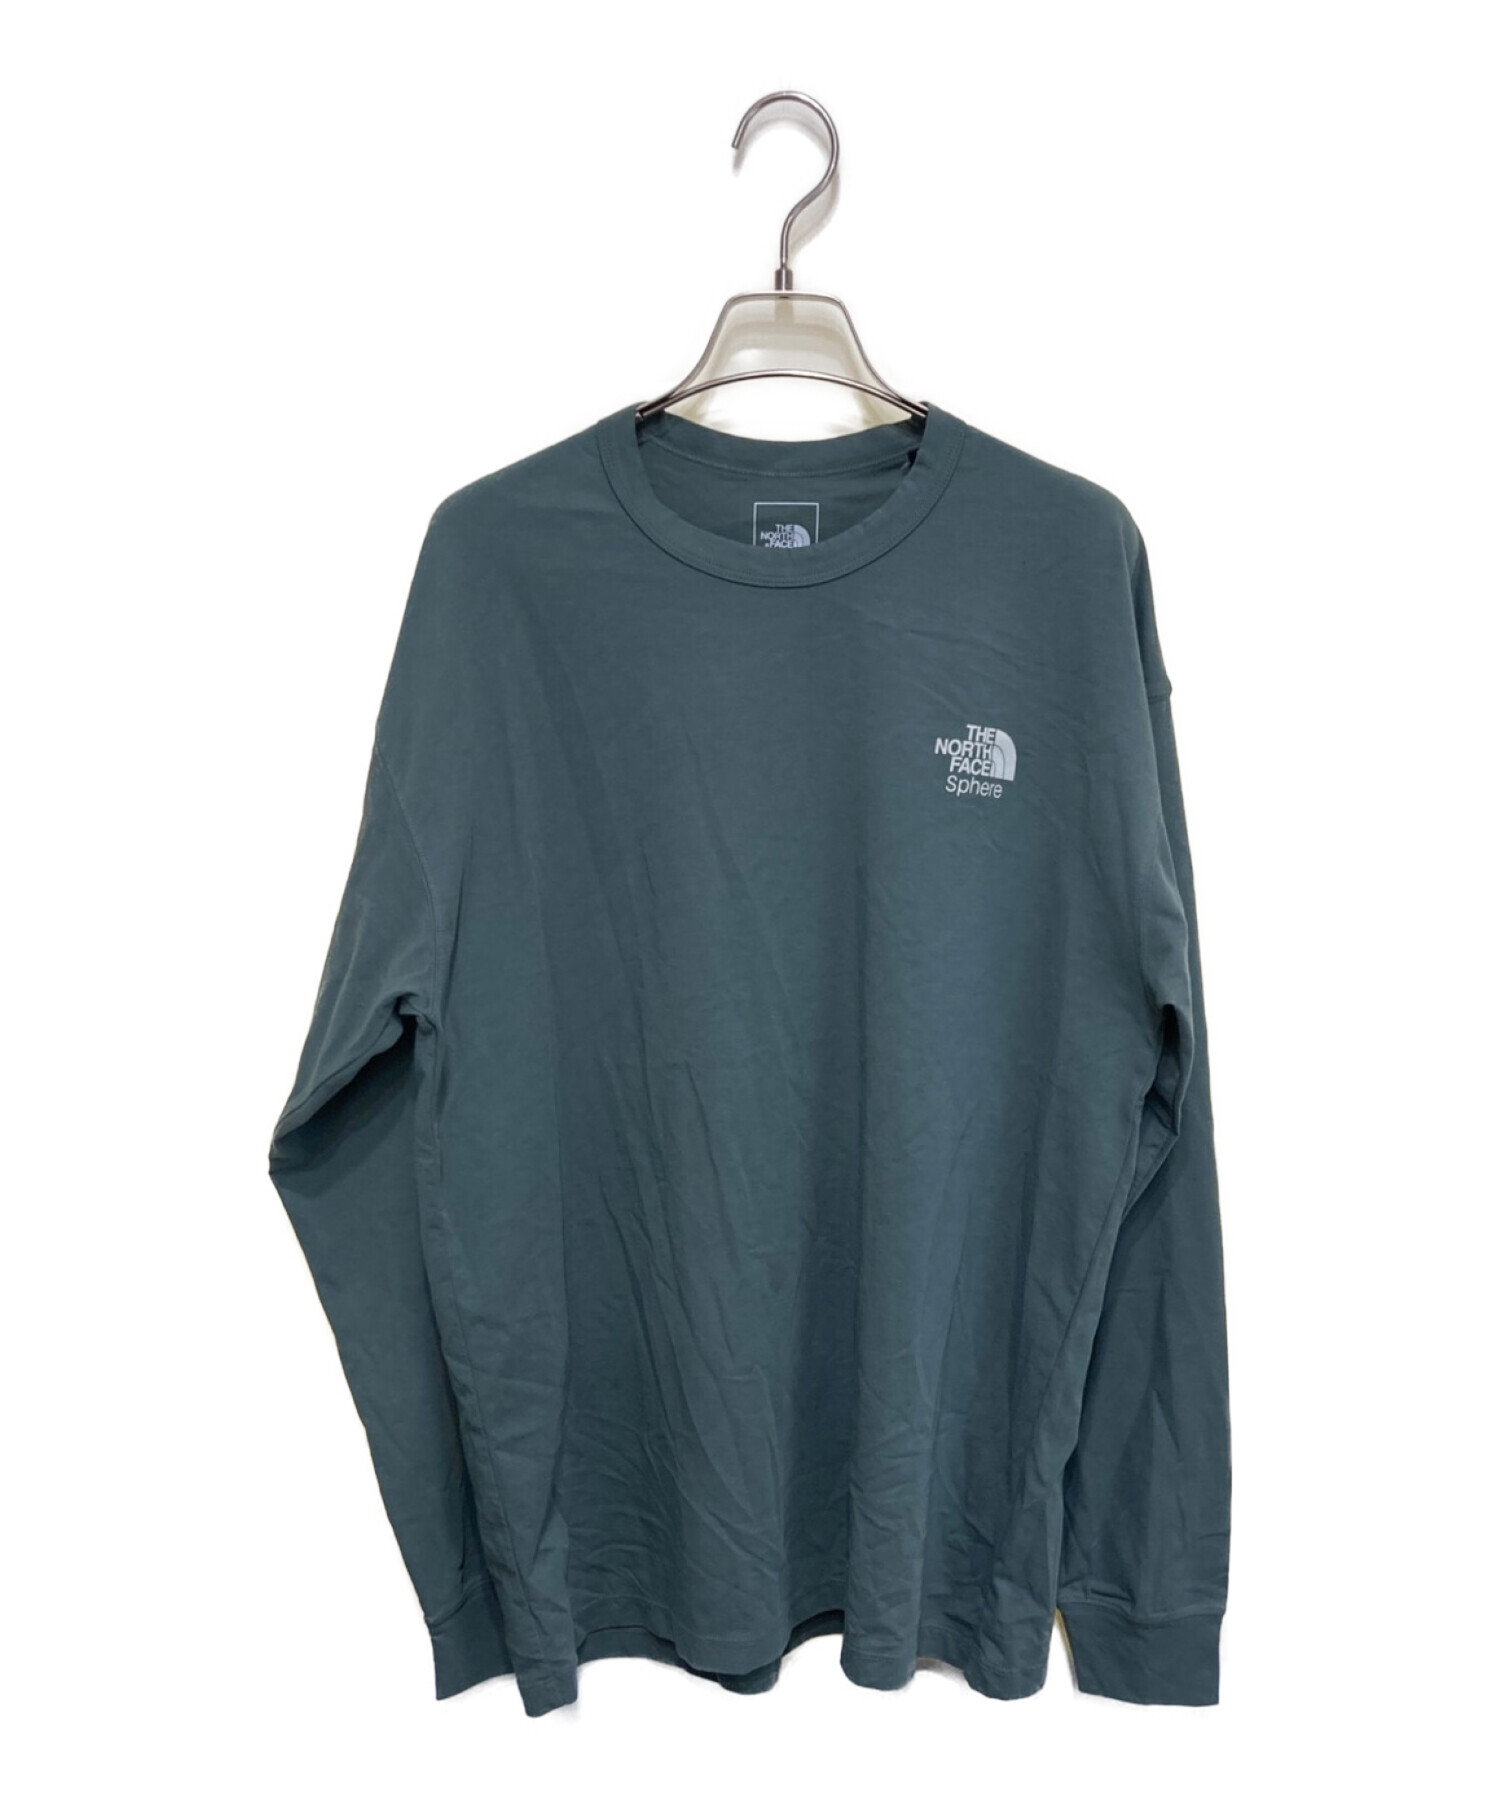 THE NORTH FACE (ザ ノース フェイス) L/S THE NORTH FACE SPHERE BL TEE 長袖　ロングスリーブ　 カットソー グリーン サイズ:XL 未使用品